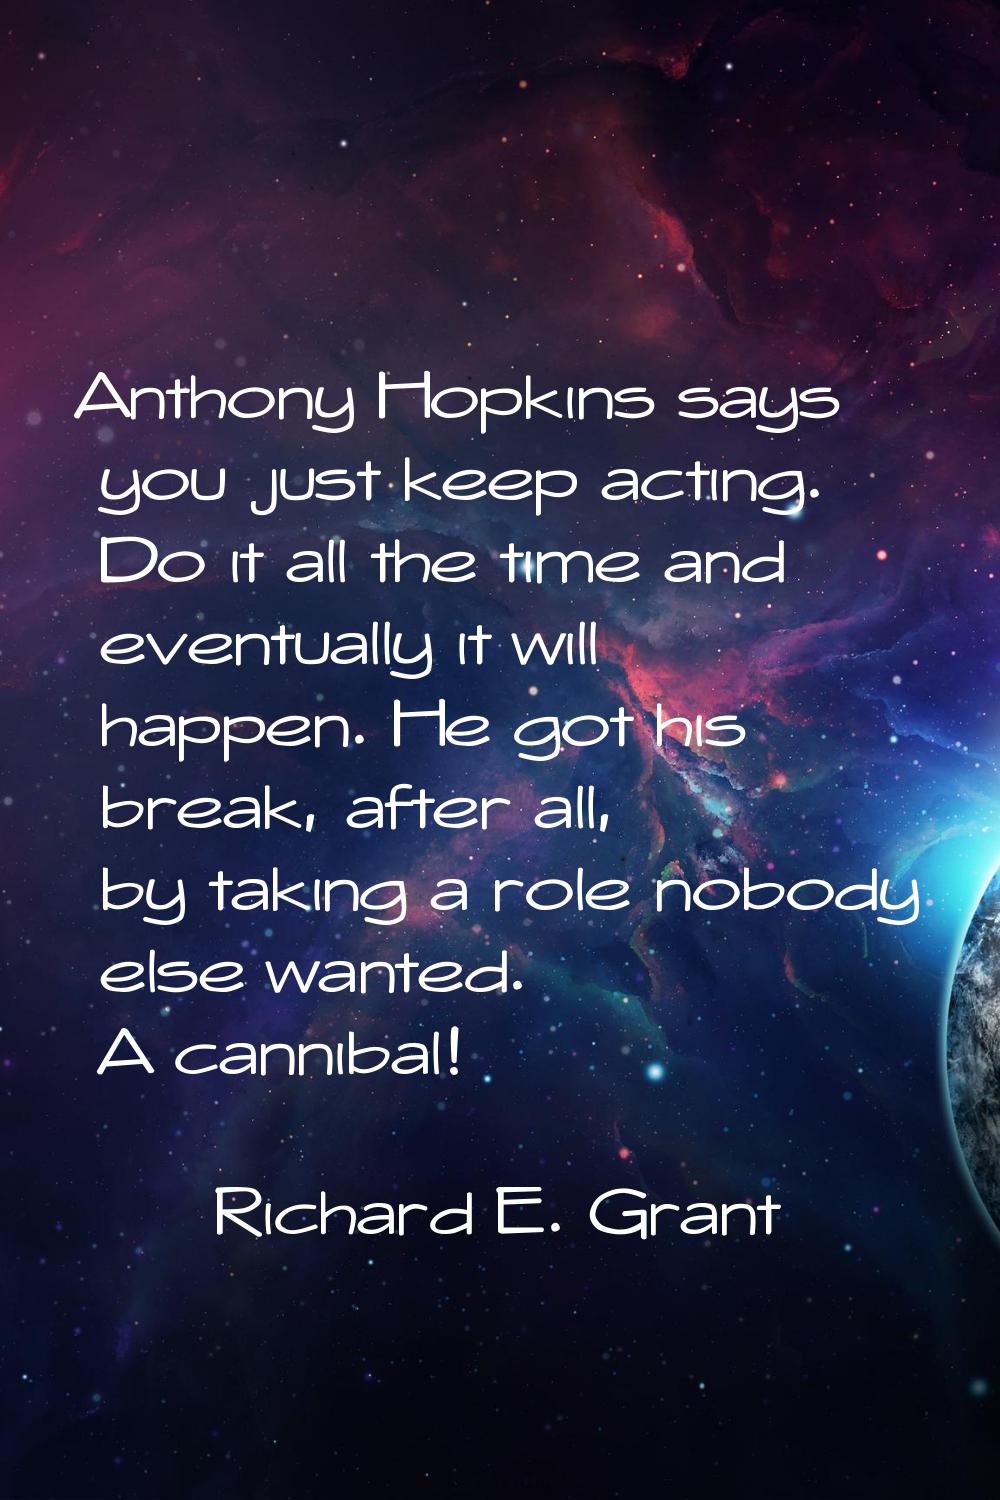 Anthony Hopkins says you just keep acting. Do it all the time and eventually it will happen. He got